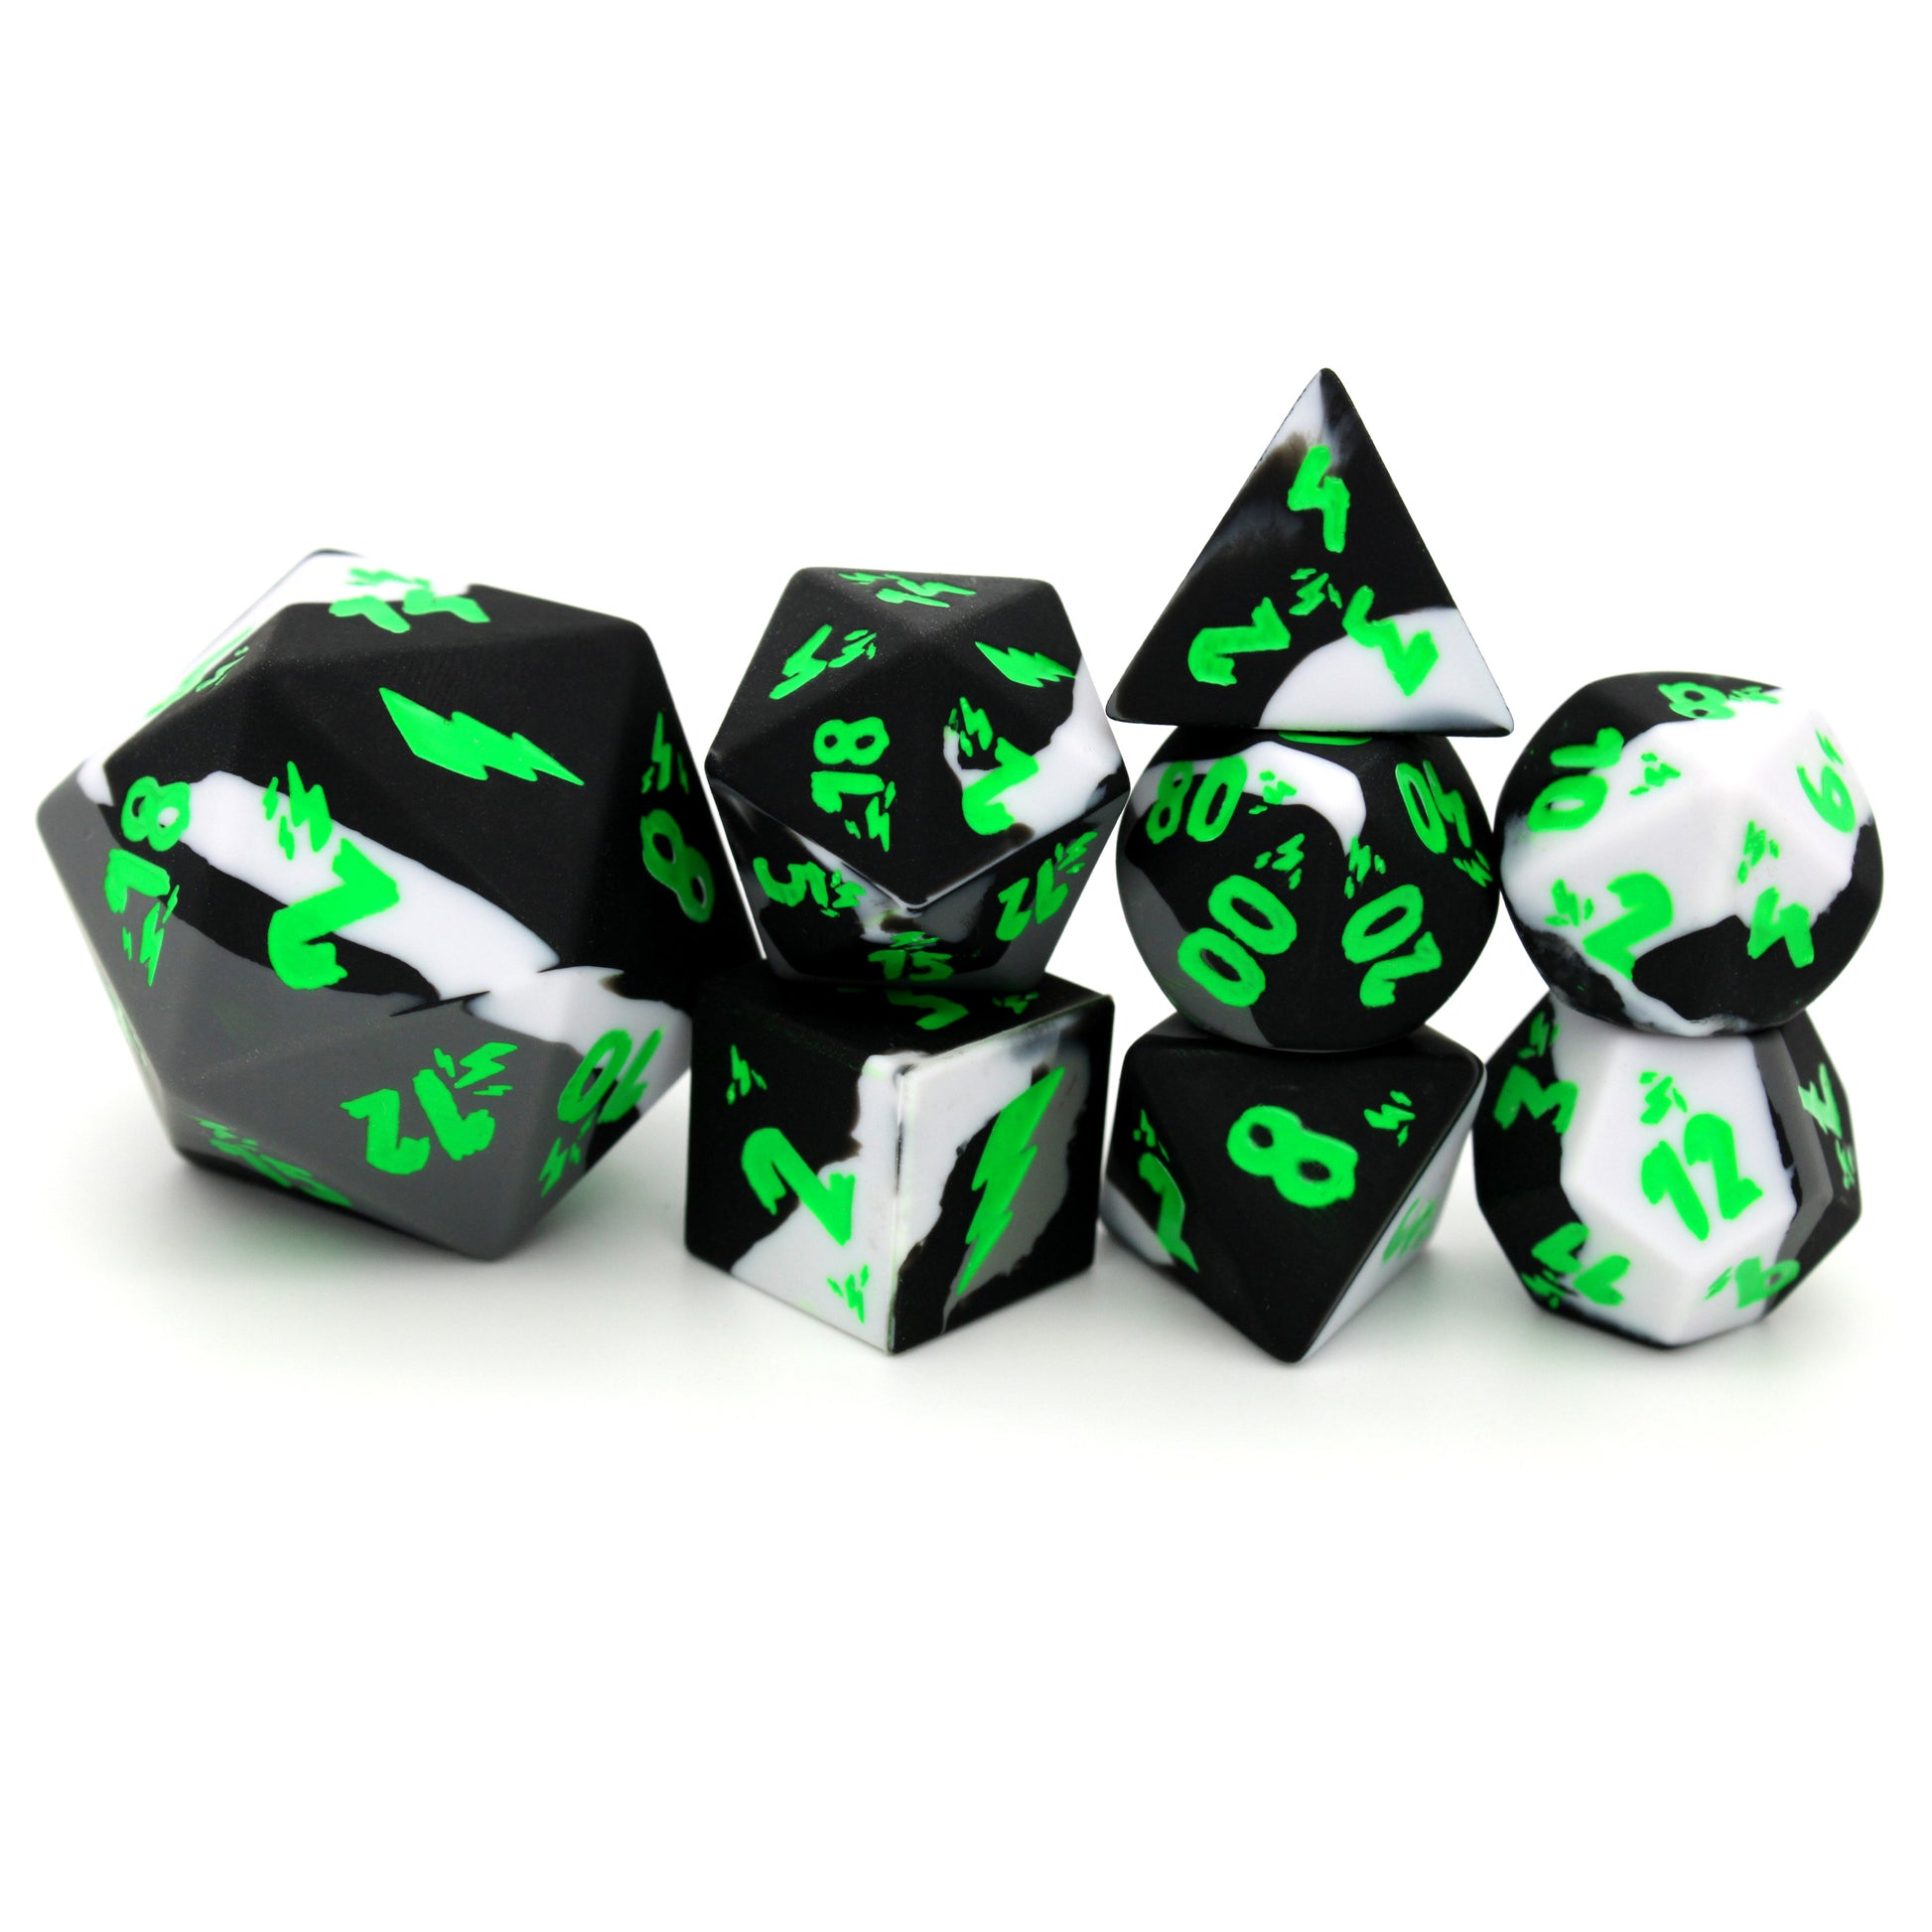 Chaotic Evil is an 8-piece, swirled silicone dice set in stark black, white, and grey. It features an electrifying, neon green ink design.